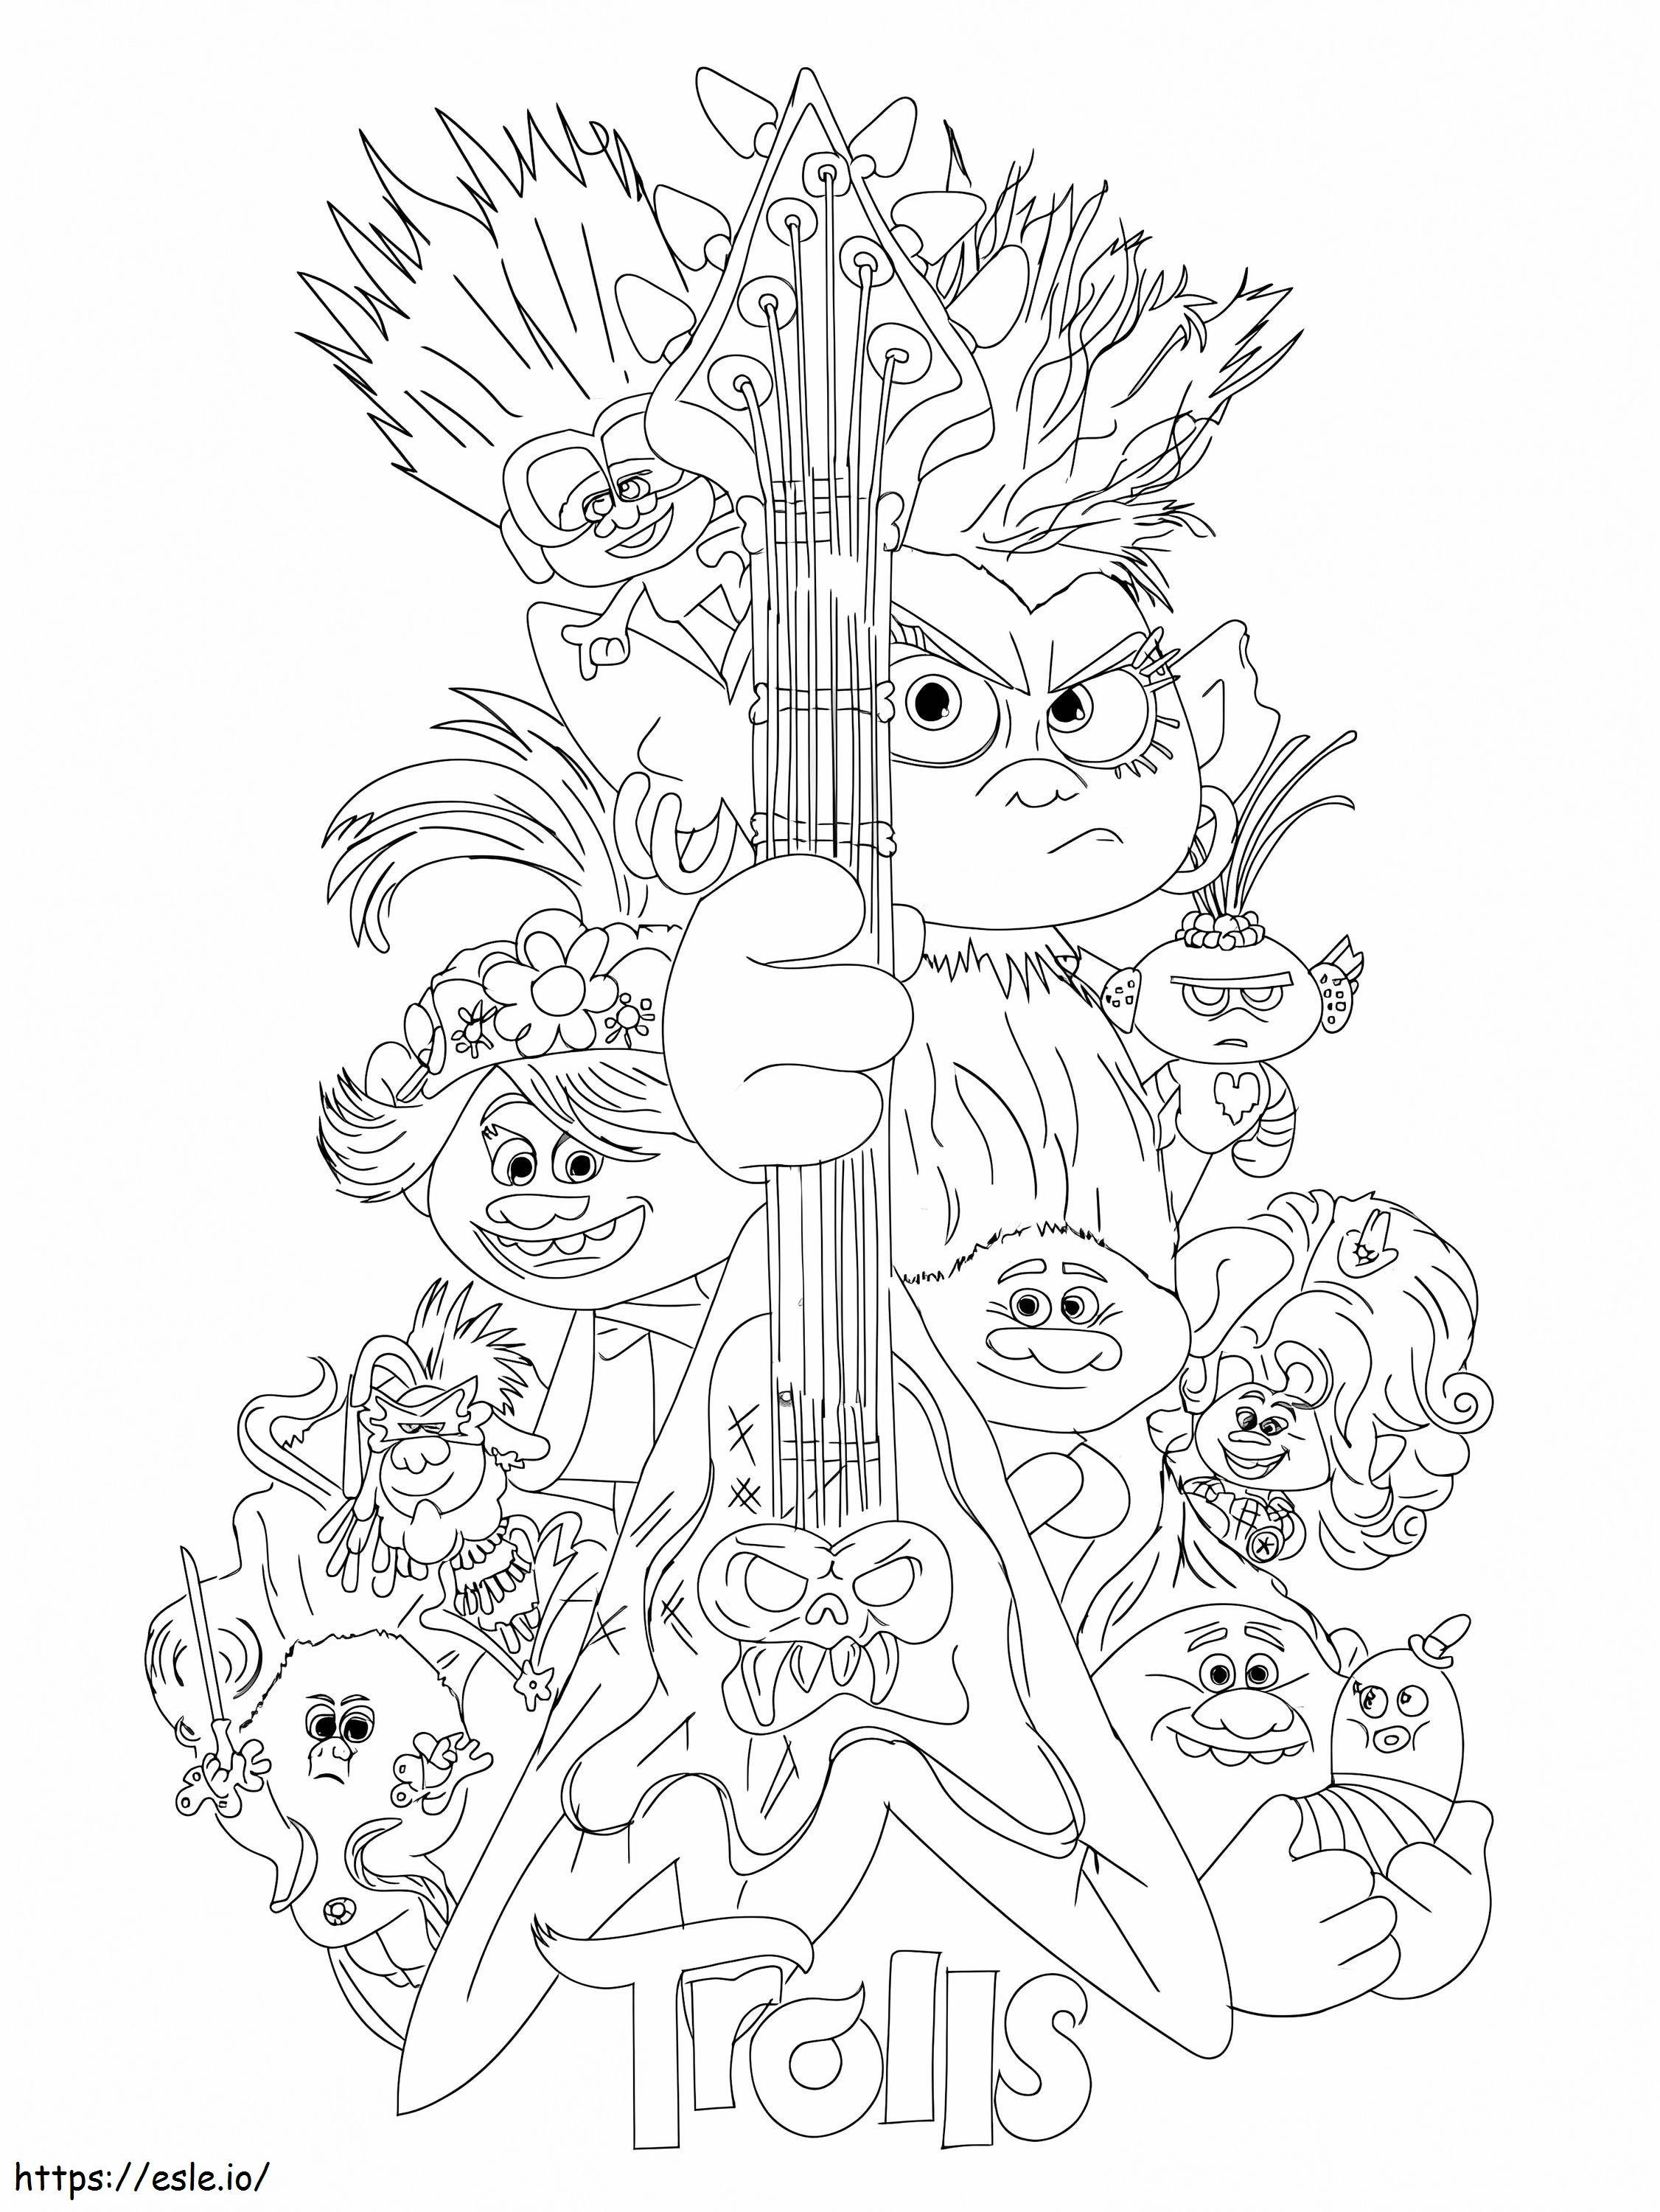 Trolls World Tour Characters coloring page